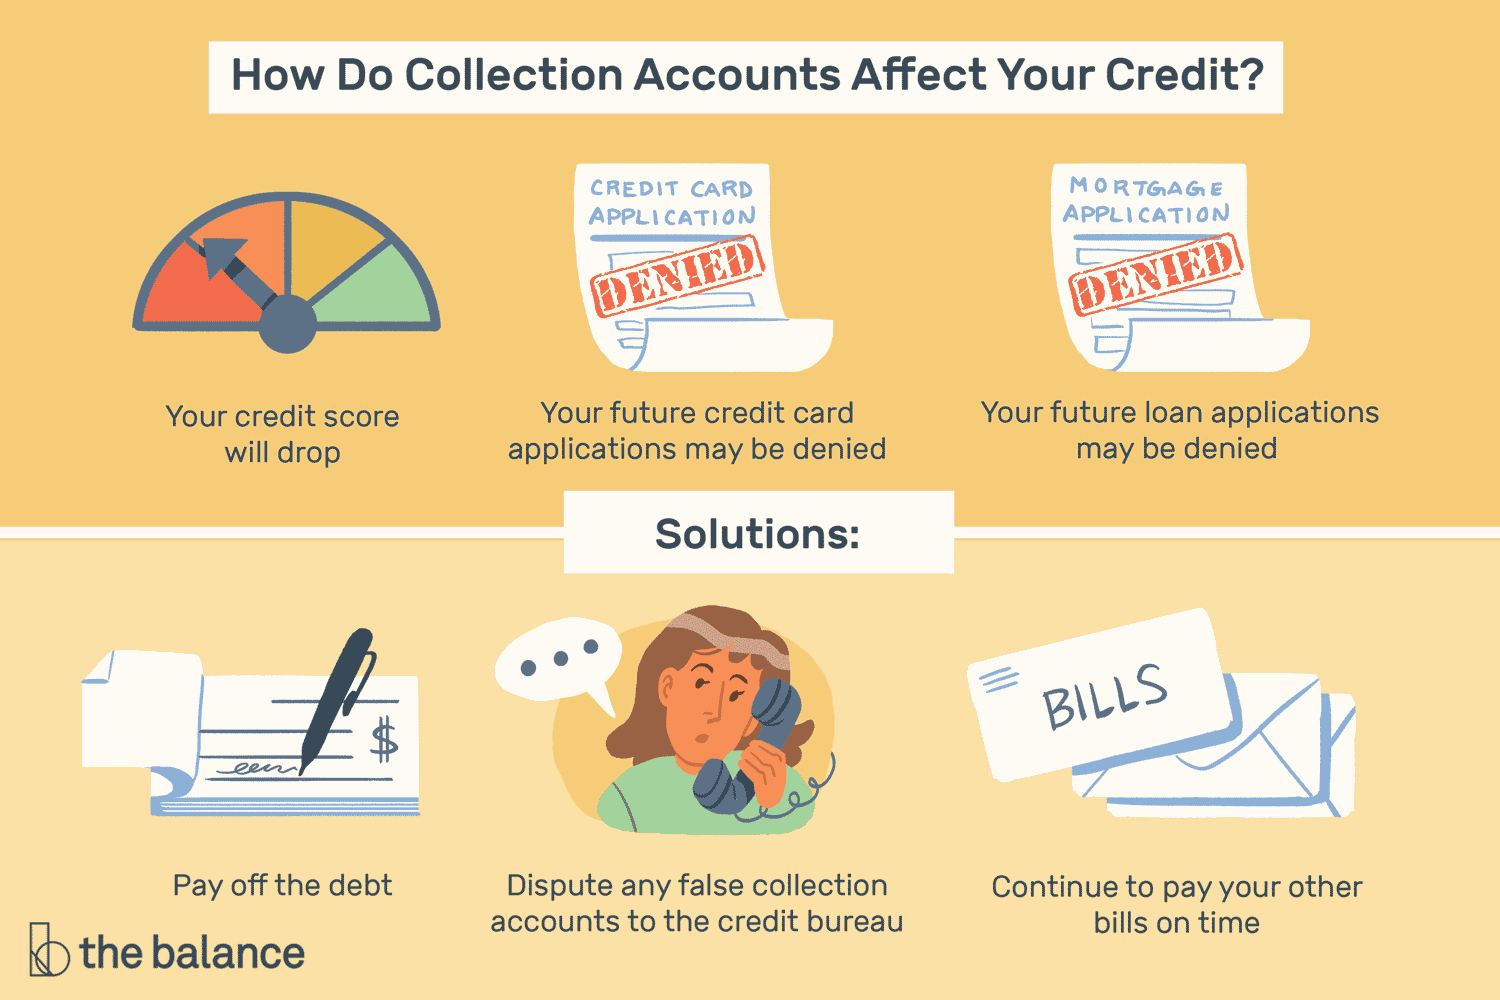 How Collections Affect Credit Score